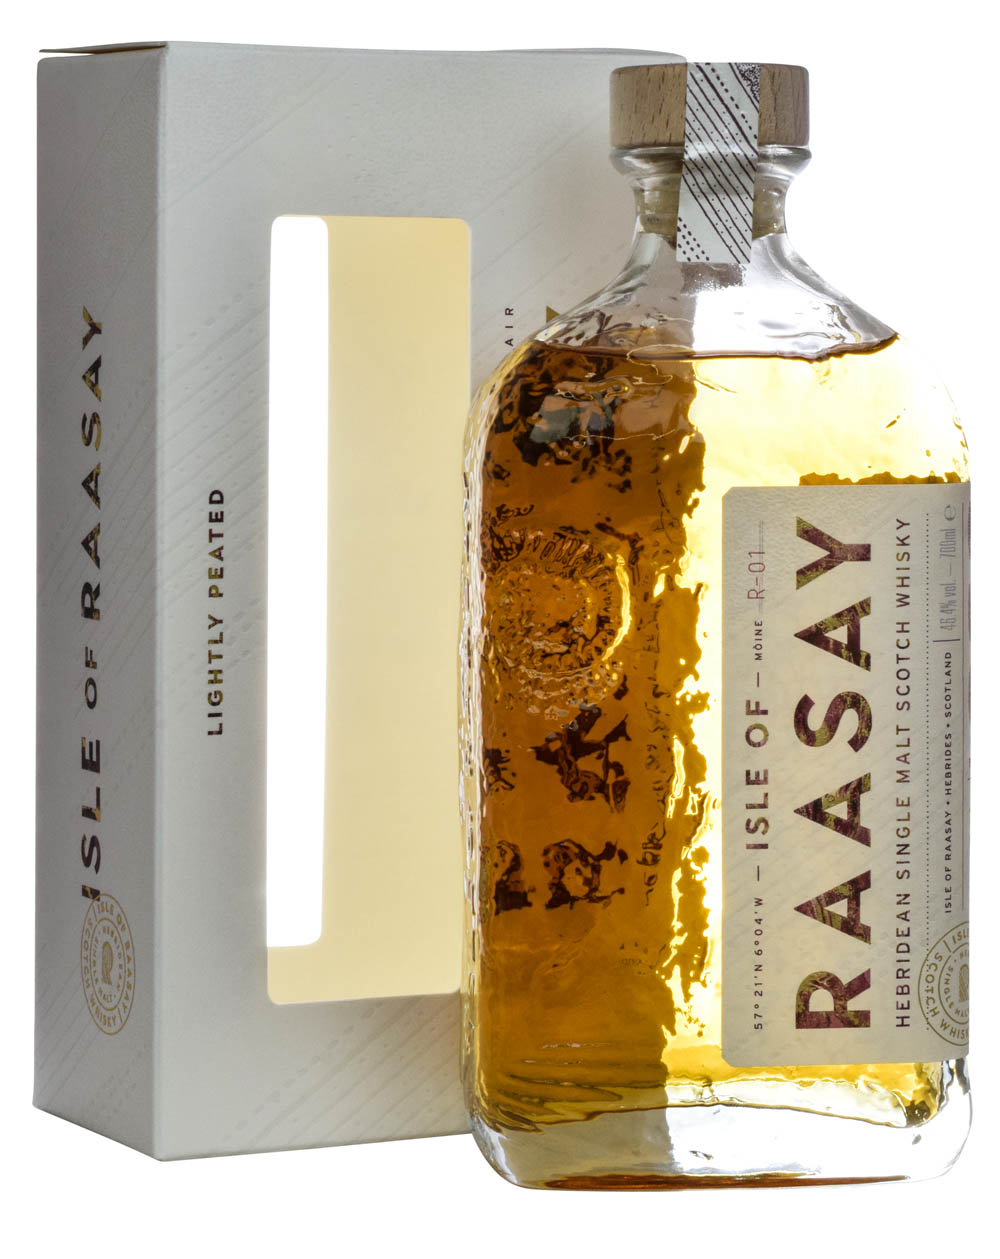 Raasay Moine R-01 Box Musthave Malts MHM